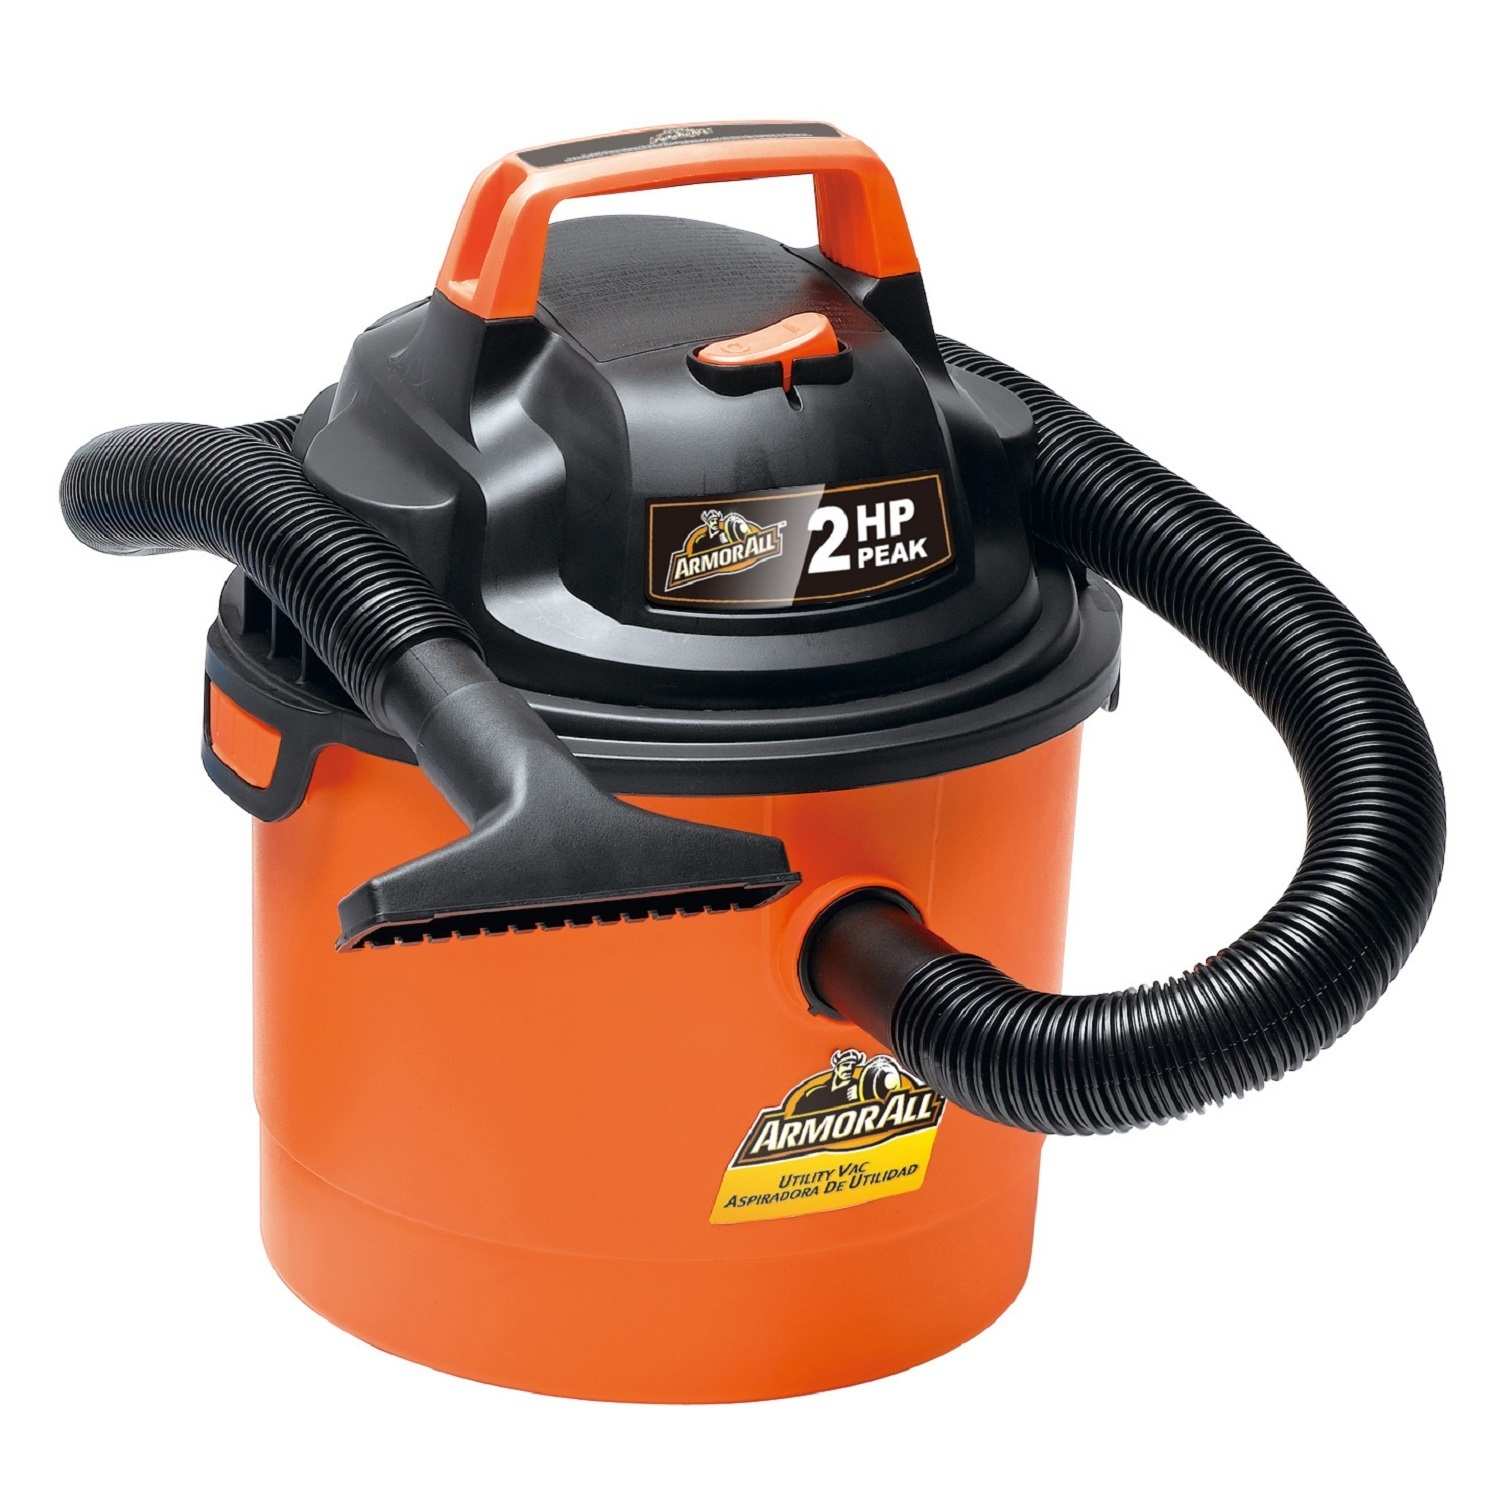 Armor All 2.5 Gallon Portable Wall Mountable Wet/Dry Utility Vaccum, Orange - image 1 of 8